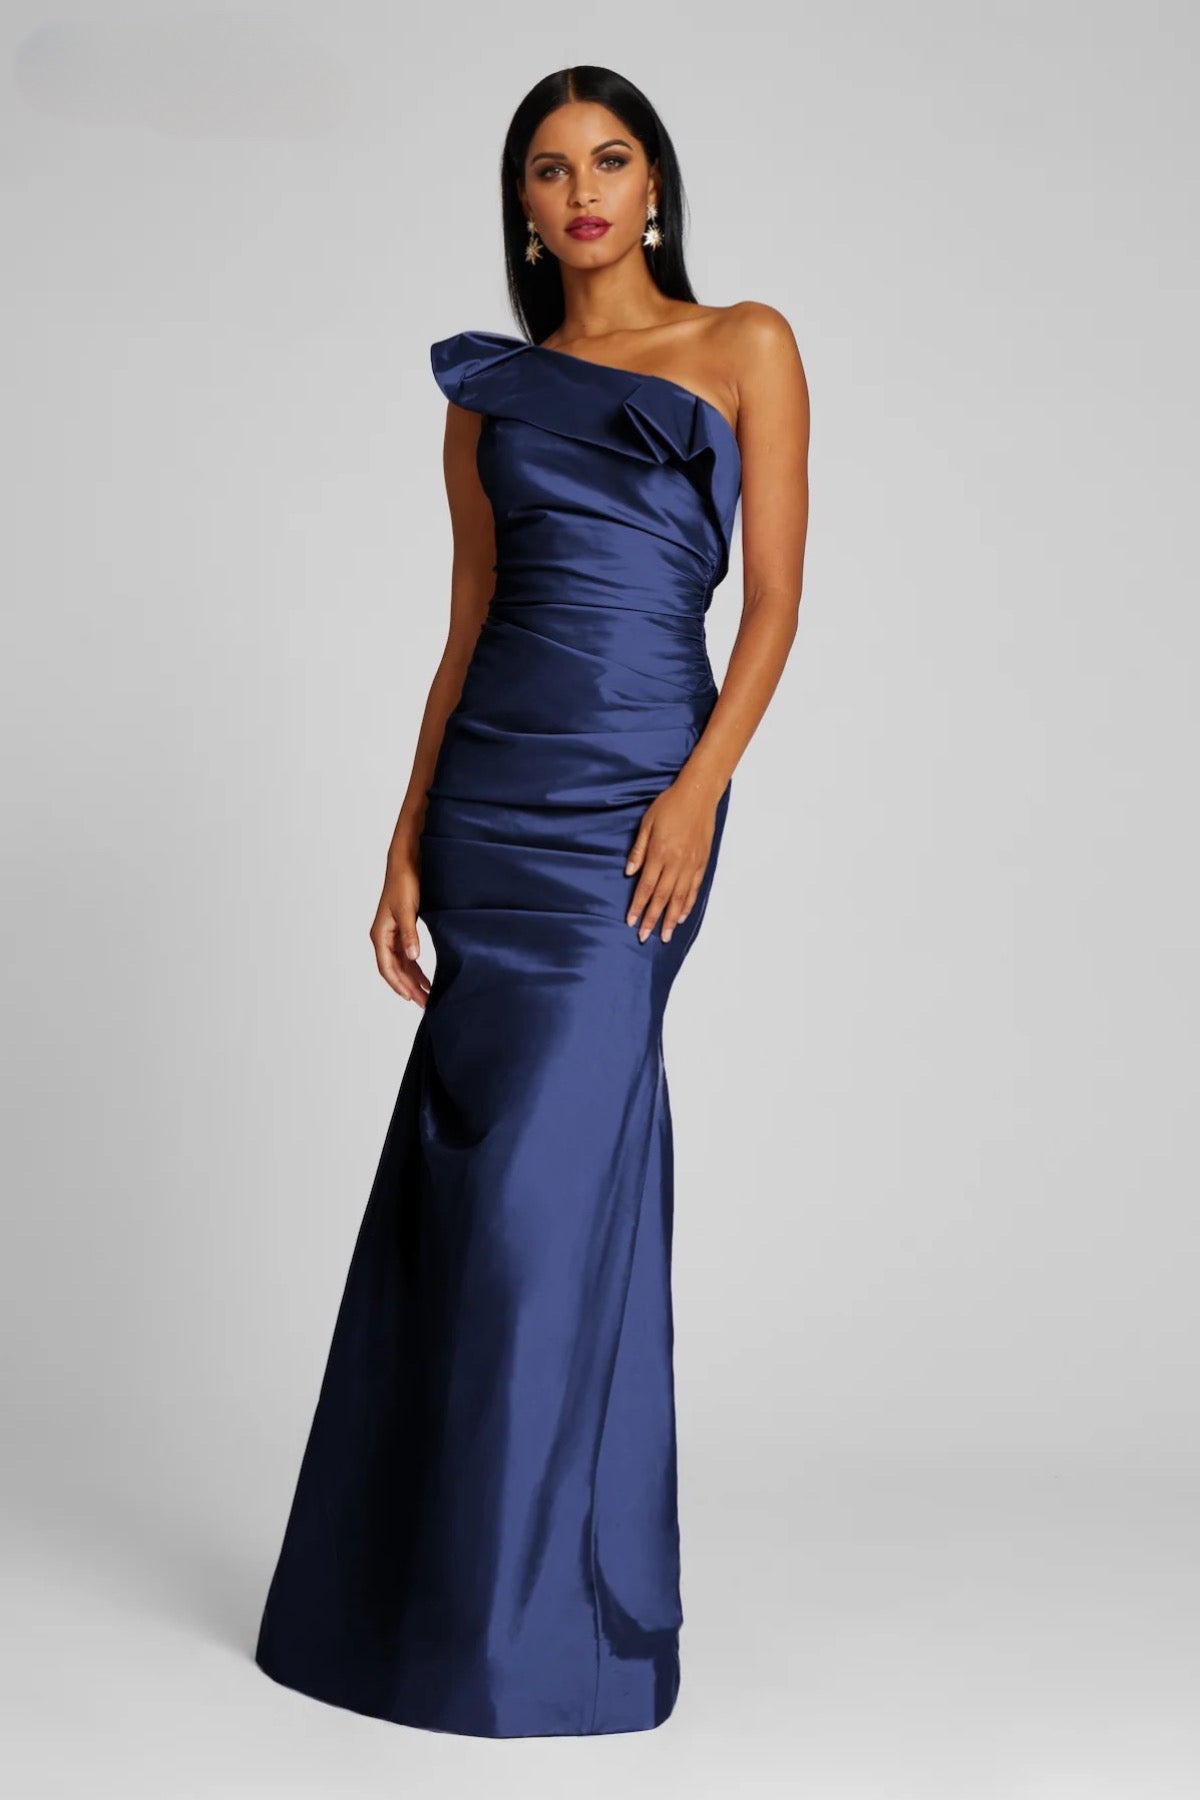 A stunning floor-length taffeta gown by Teri Jon, featuring a one-shoulder design with draped detailing, perfect for mother of the bride or groom occasions, black tie parties, and galas. Available at Madeline's Boutique in Toronto and Boca Raton.